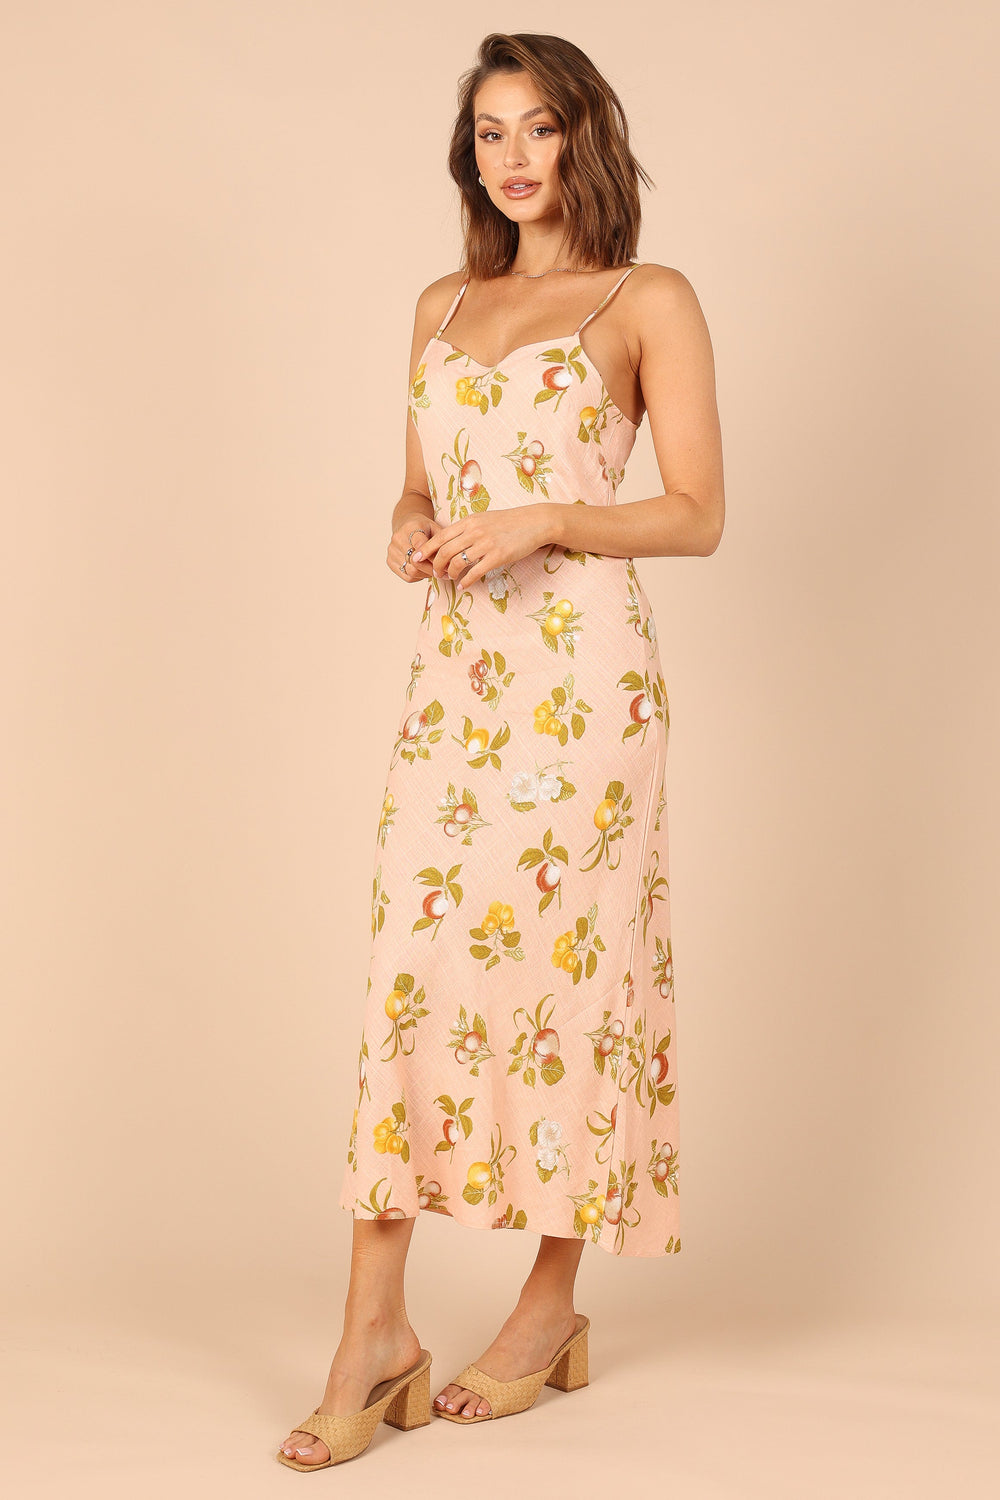 Petal and Pup USA DRESSES Cecily Slip Dress - Pink Floral